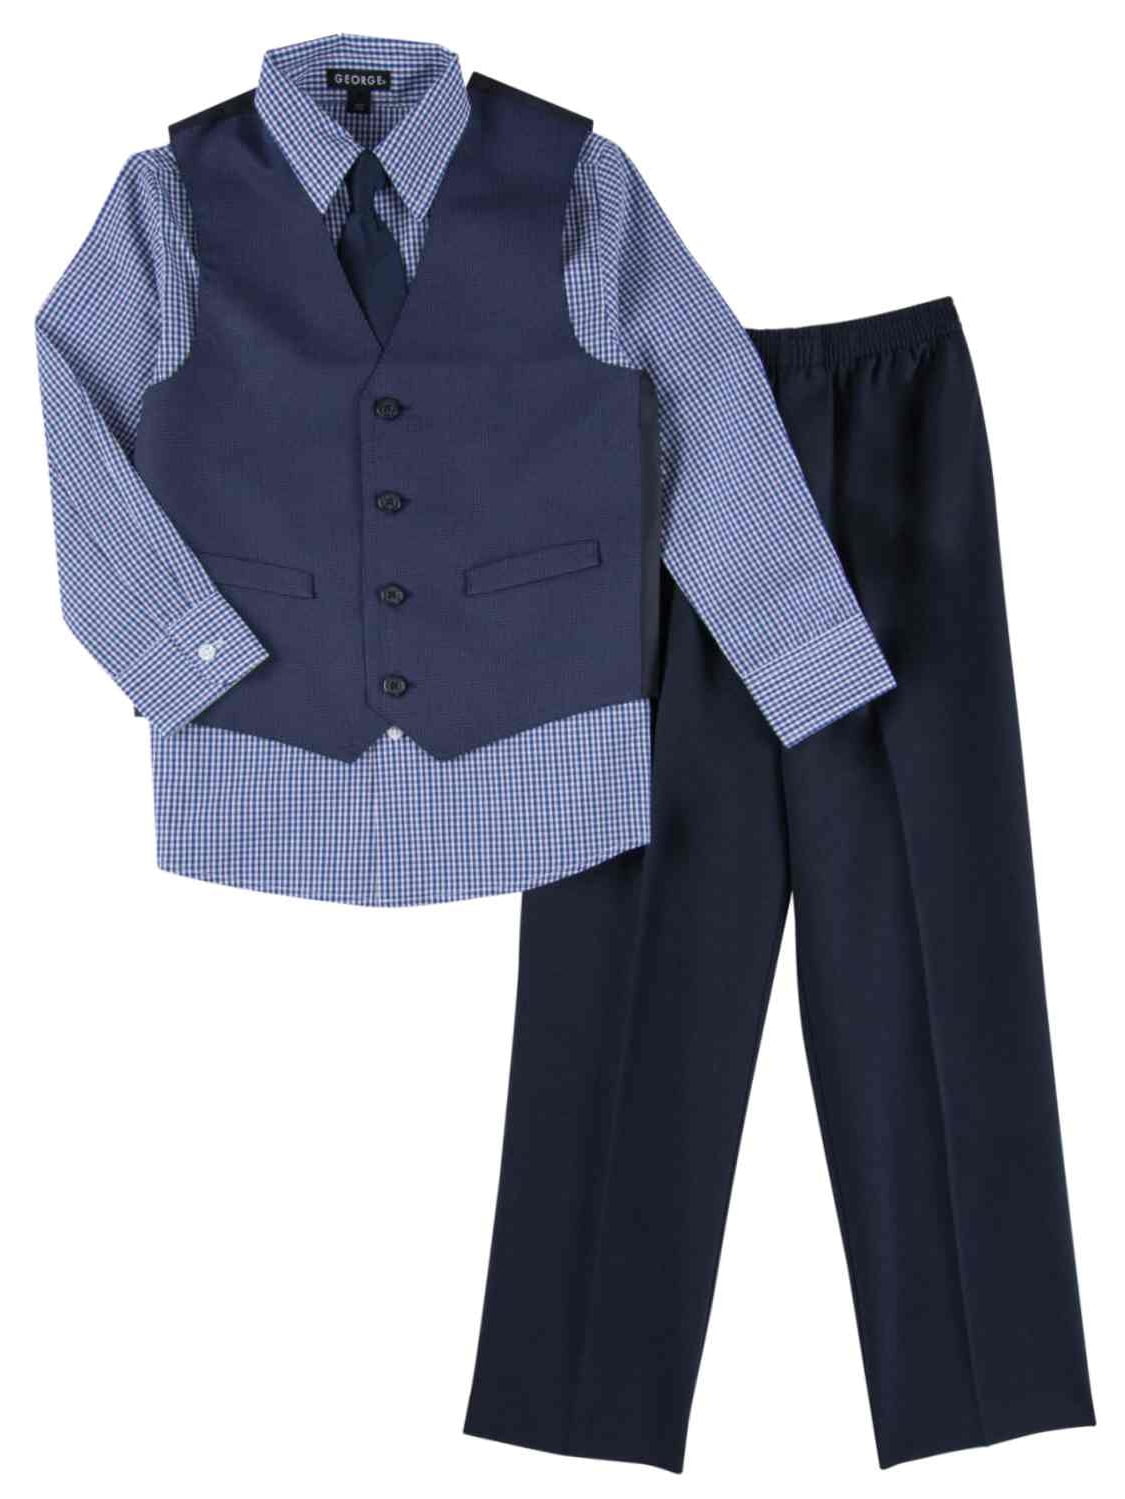 GEORGE - Toddler & Boys 4 Piece Blue Holiday Dress Up Outfit Suit Tie ...